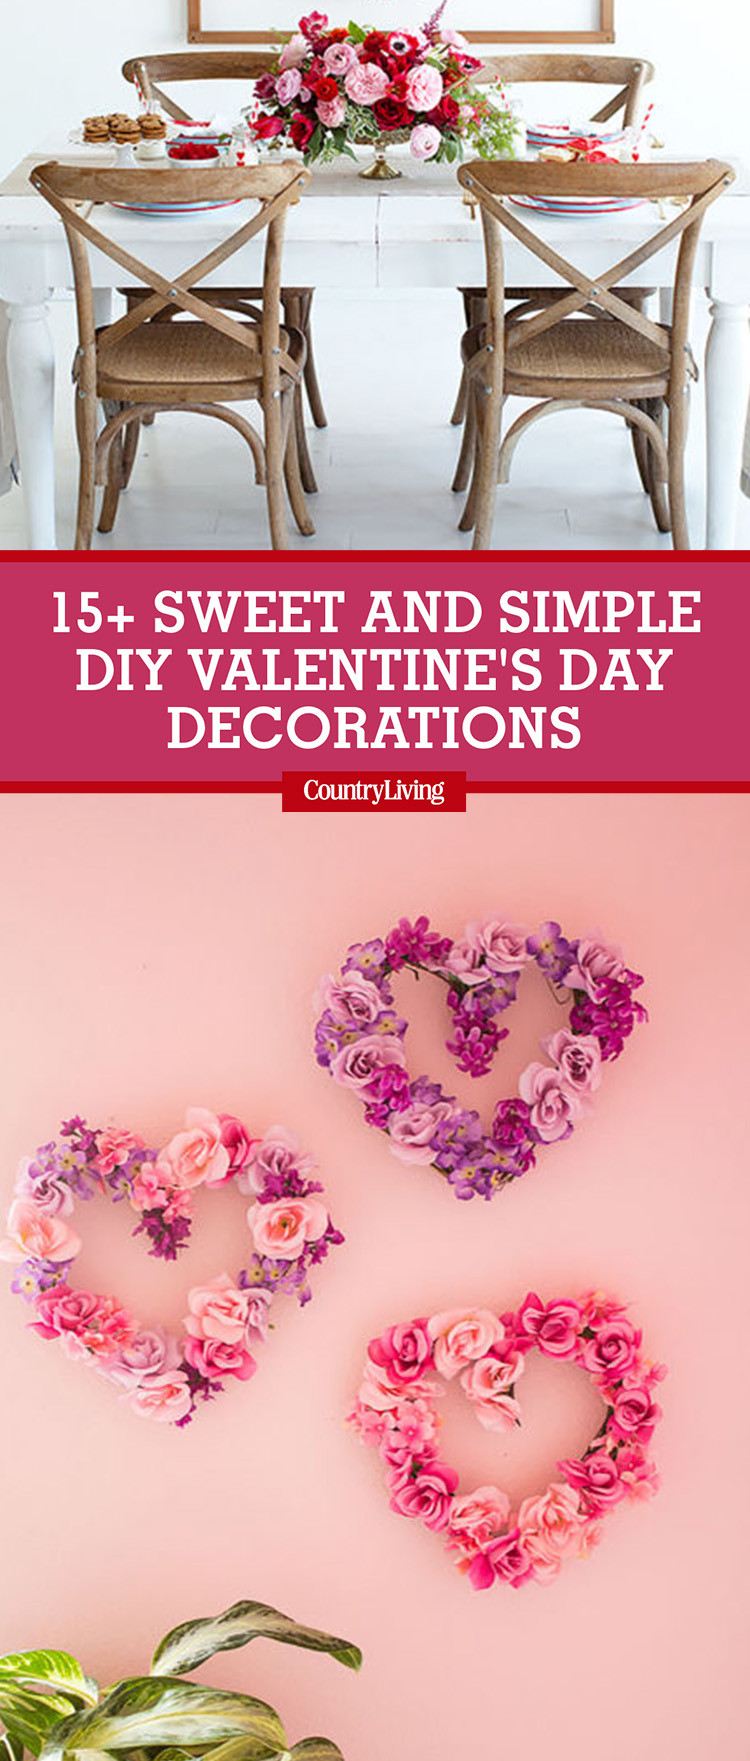 Valentine'S Day Decorations DIY
 18 Sweet and Simple DIY Valentine s Day Decorations